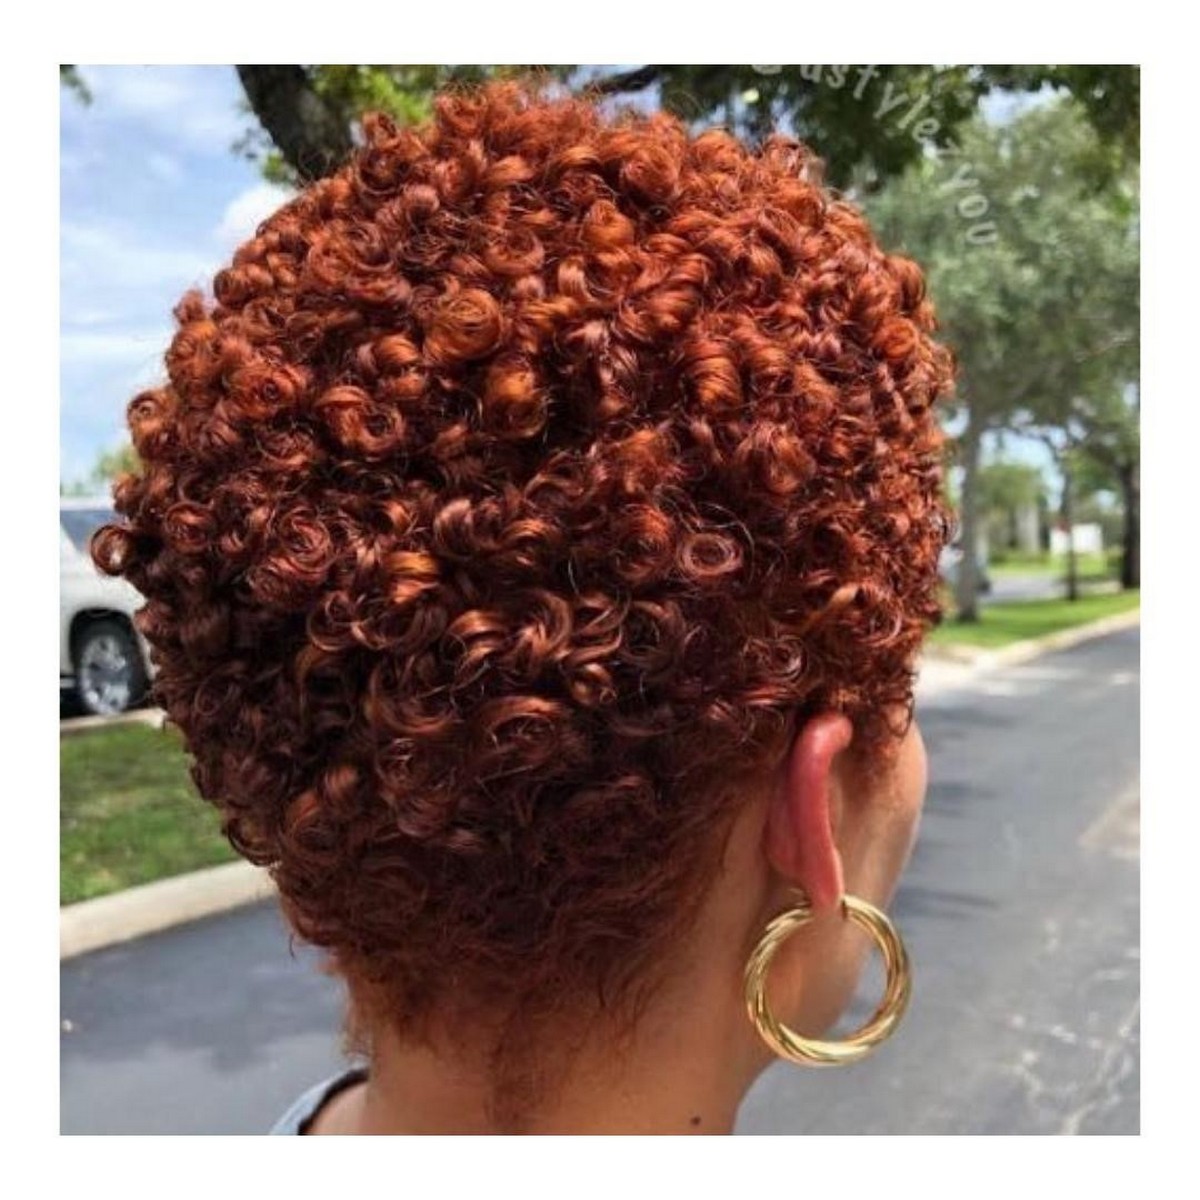 Spicy Curly Copper Natural Hair